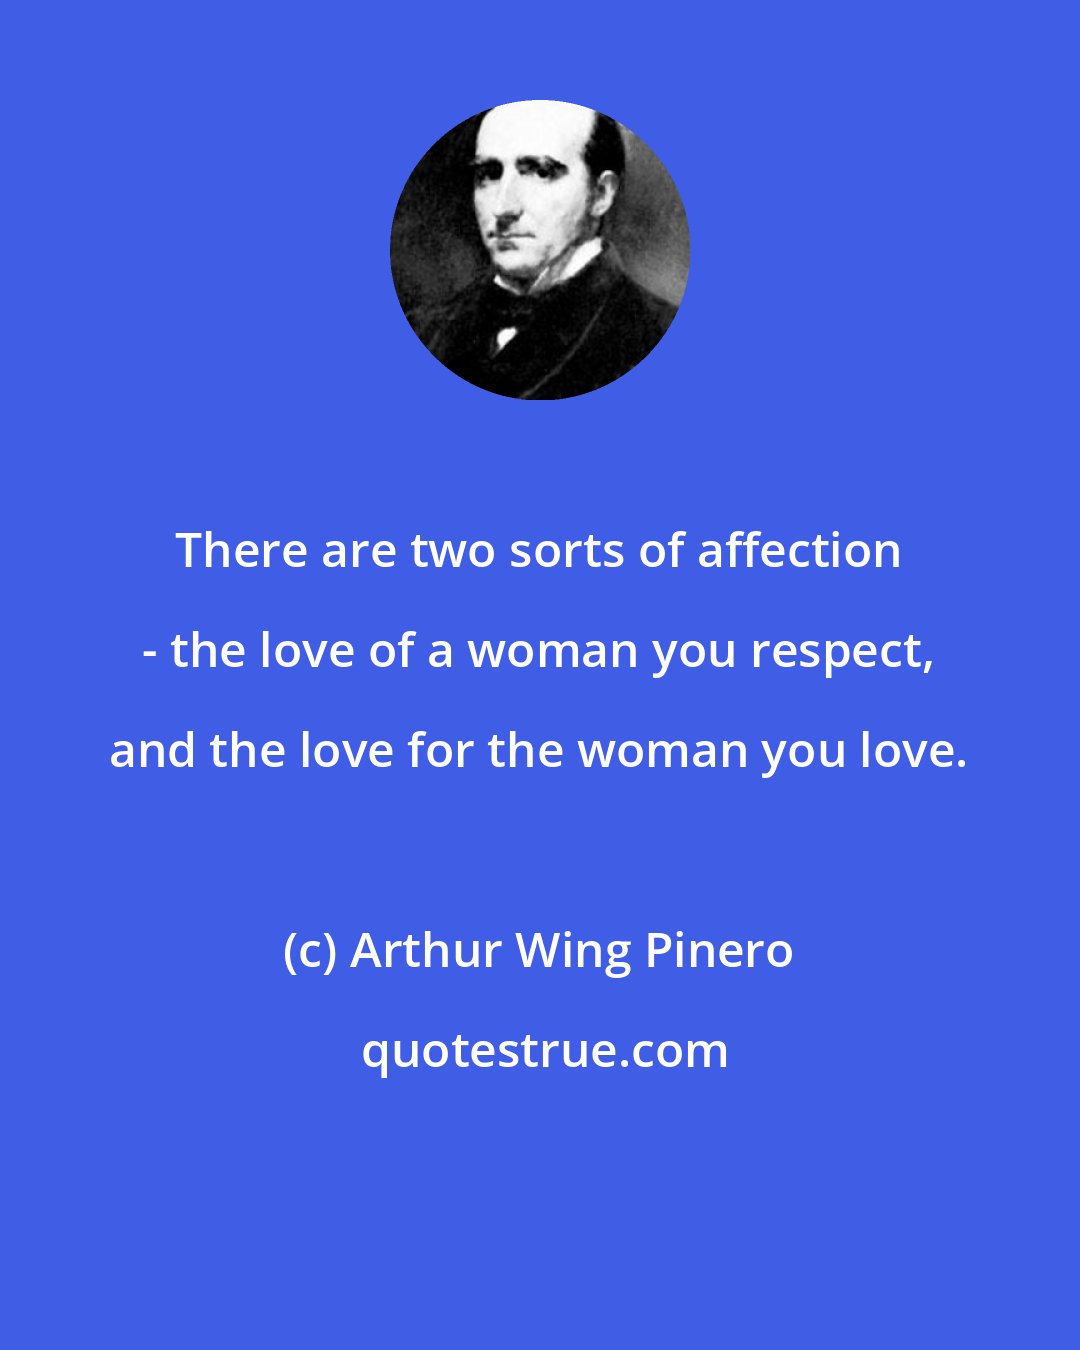 Arthur Wing Pinero: There are two sorts of affection - the love of a woman you respect, and the love for the woman you love.